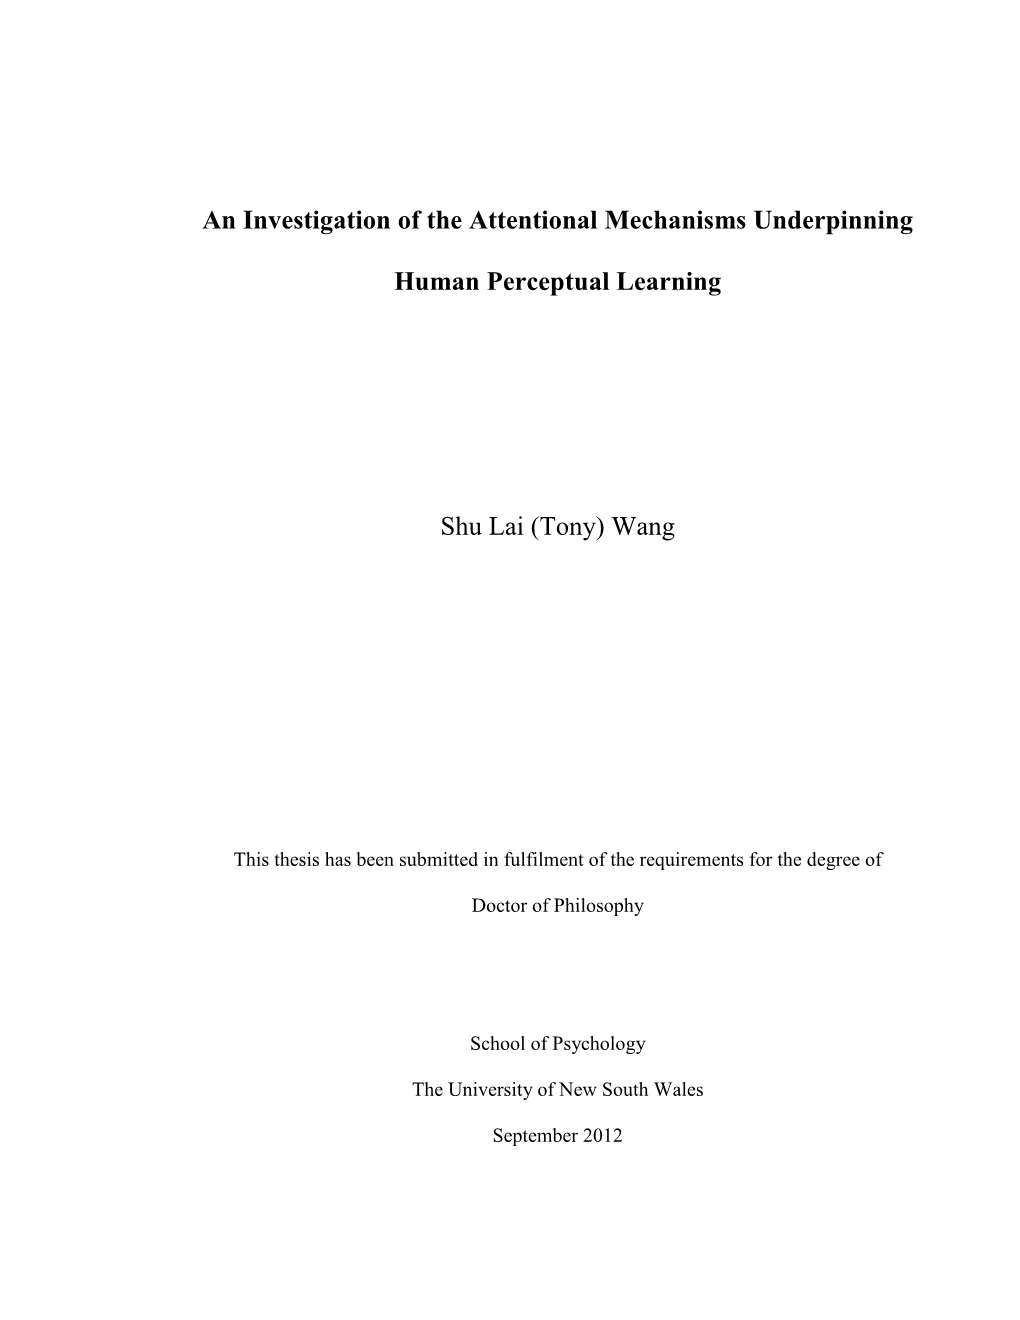 An Investigation of the Attentional Mechanisms Underpinning